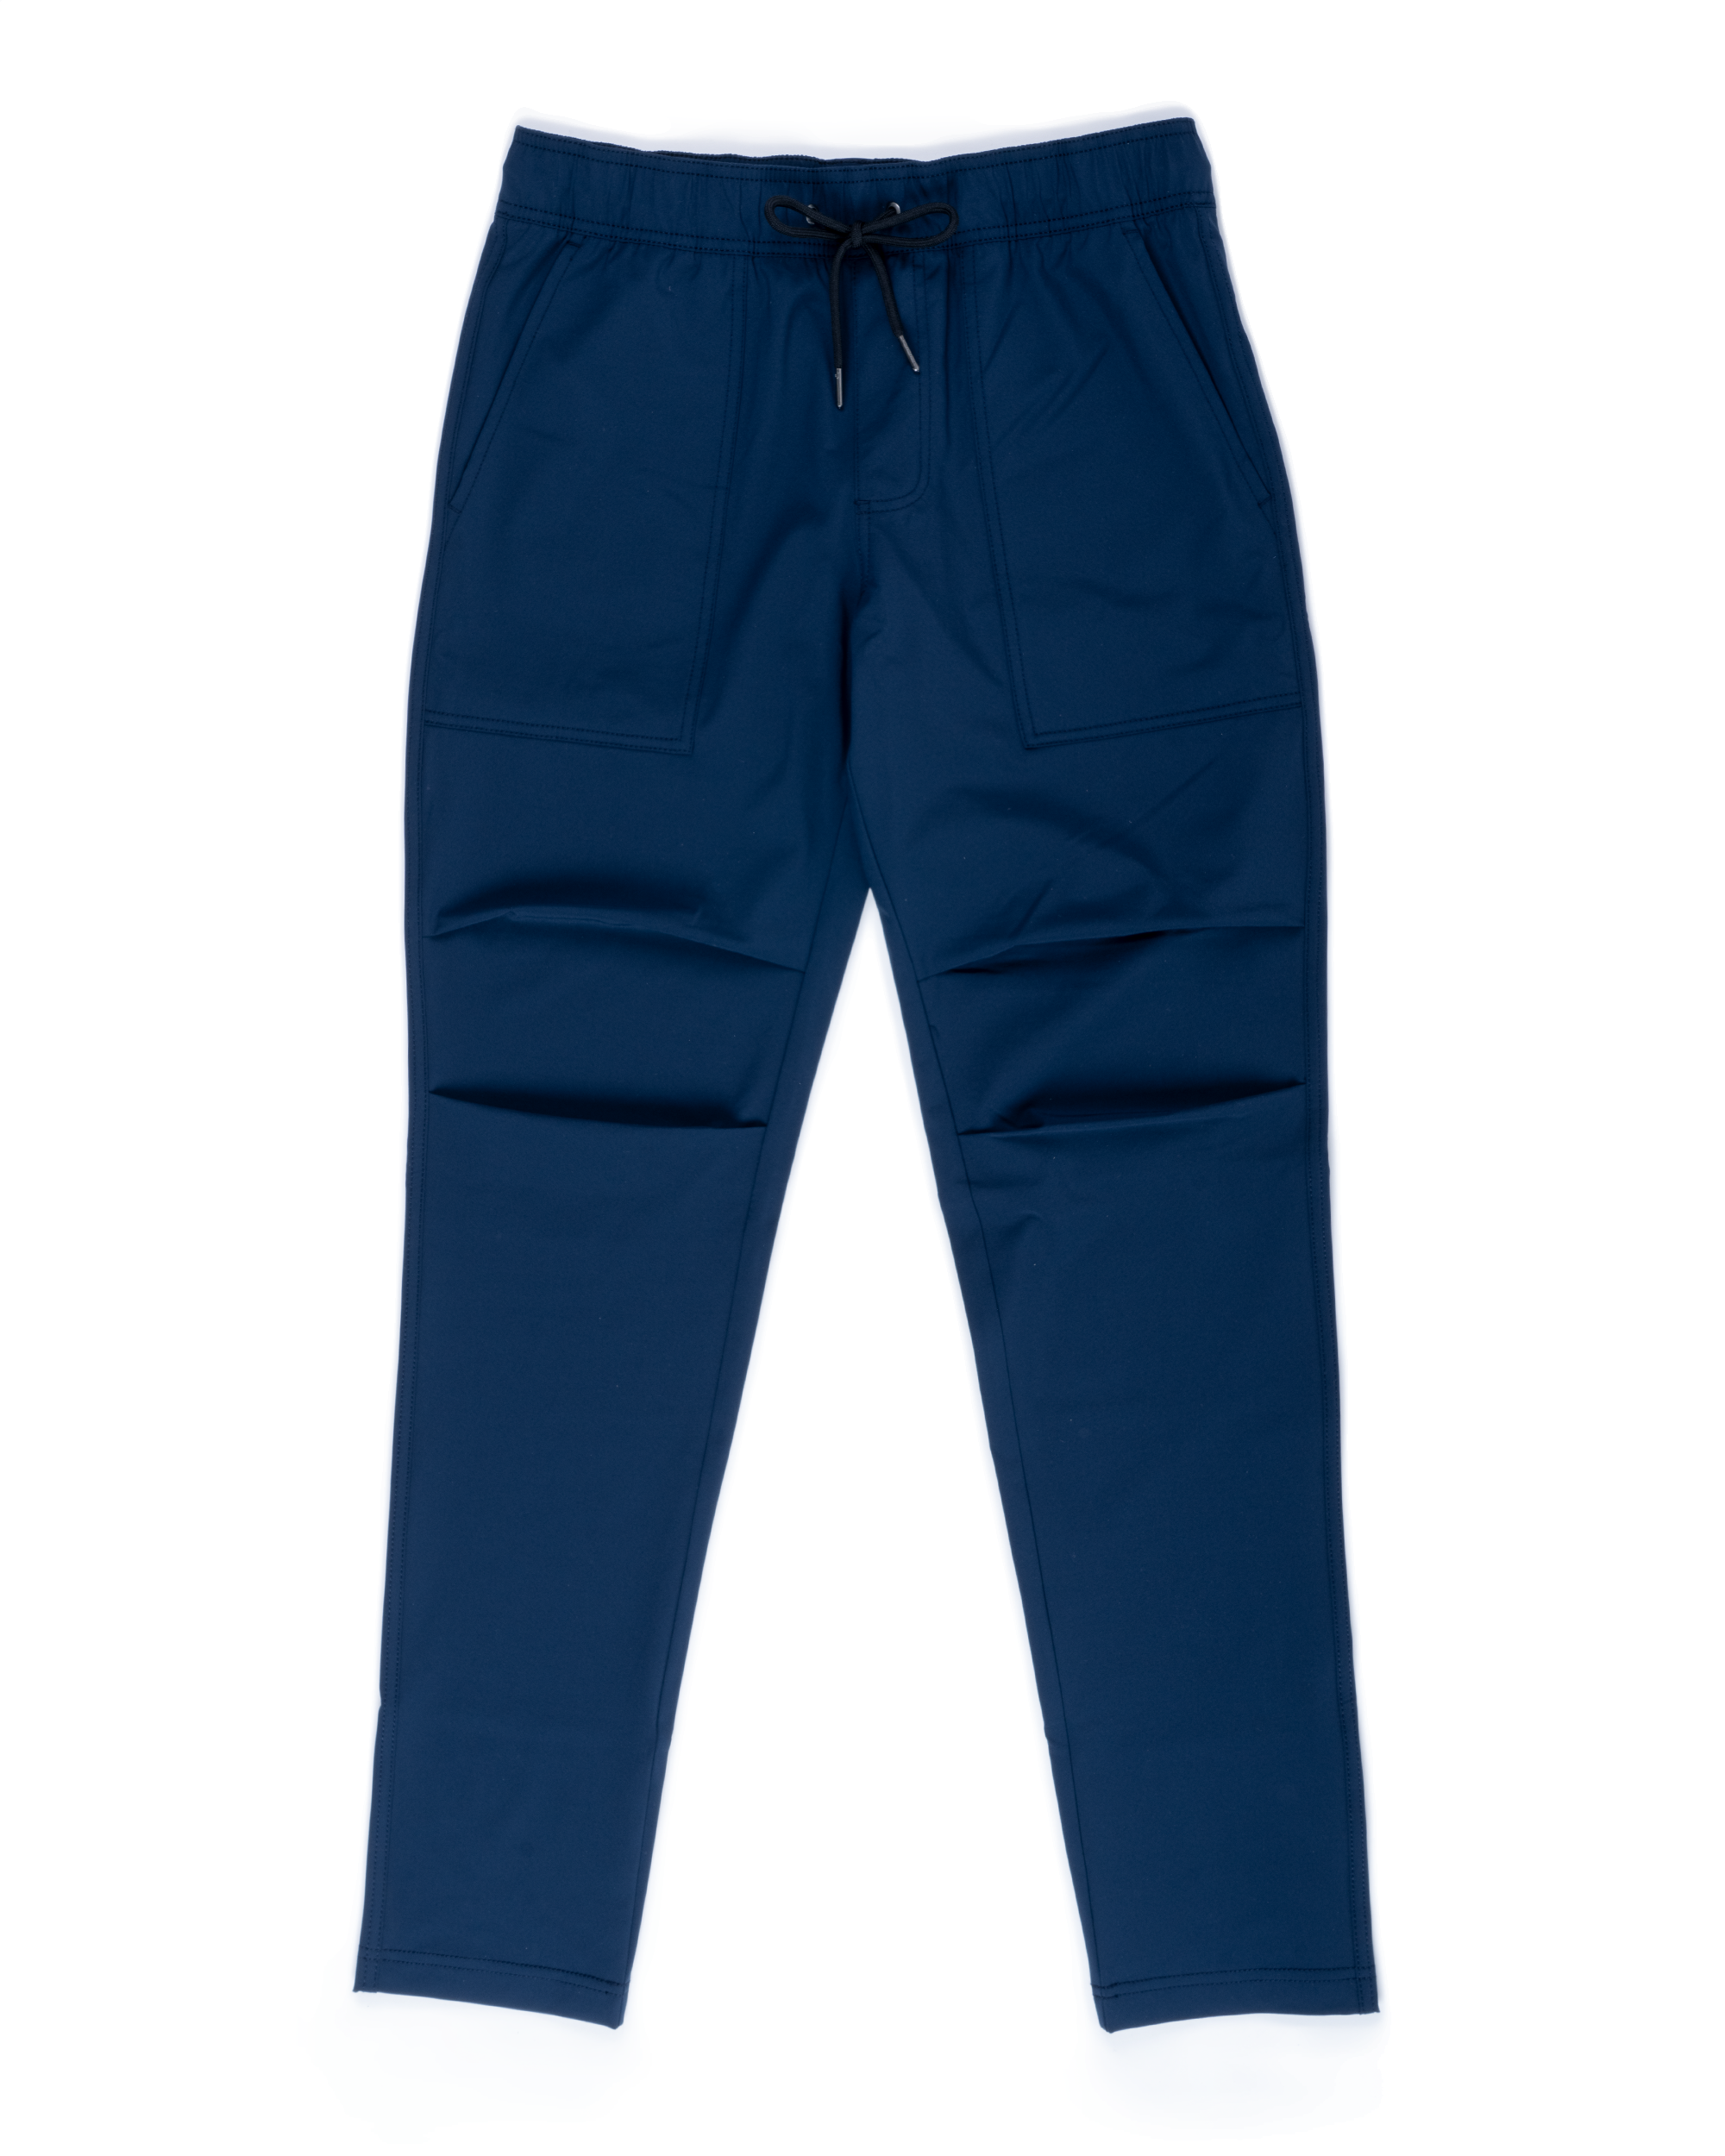 Utility Pull On Performance Pant Navy - Foreign Rider Co.